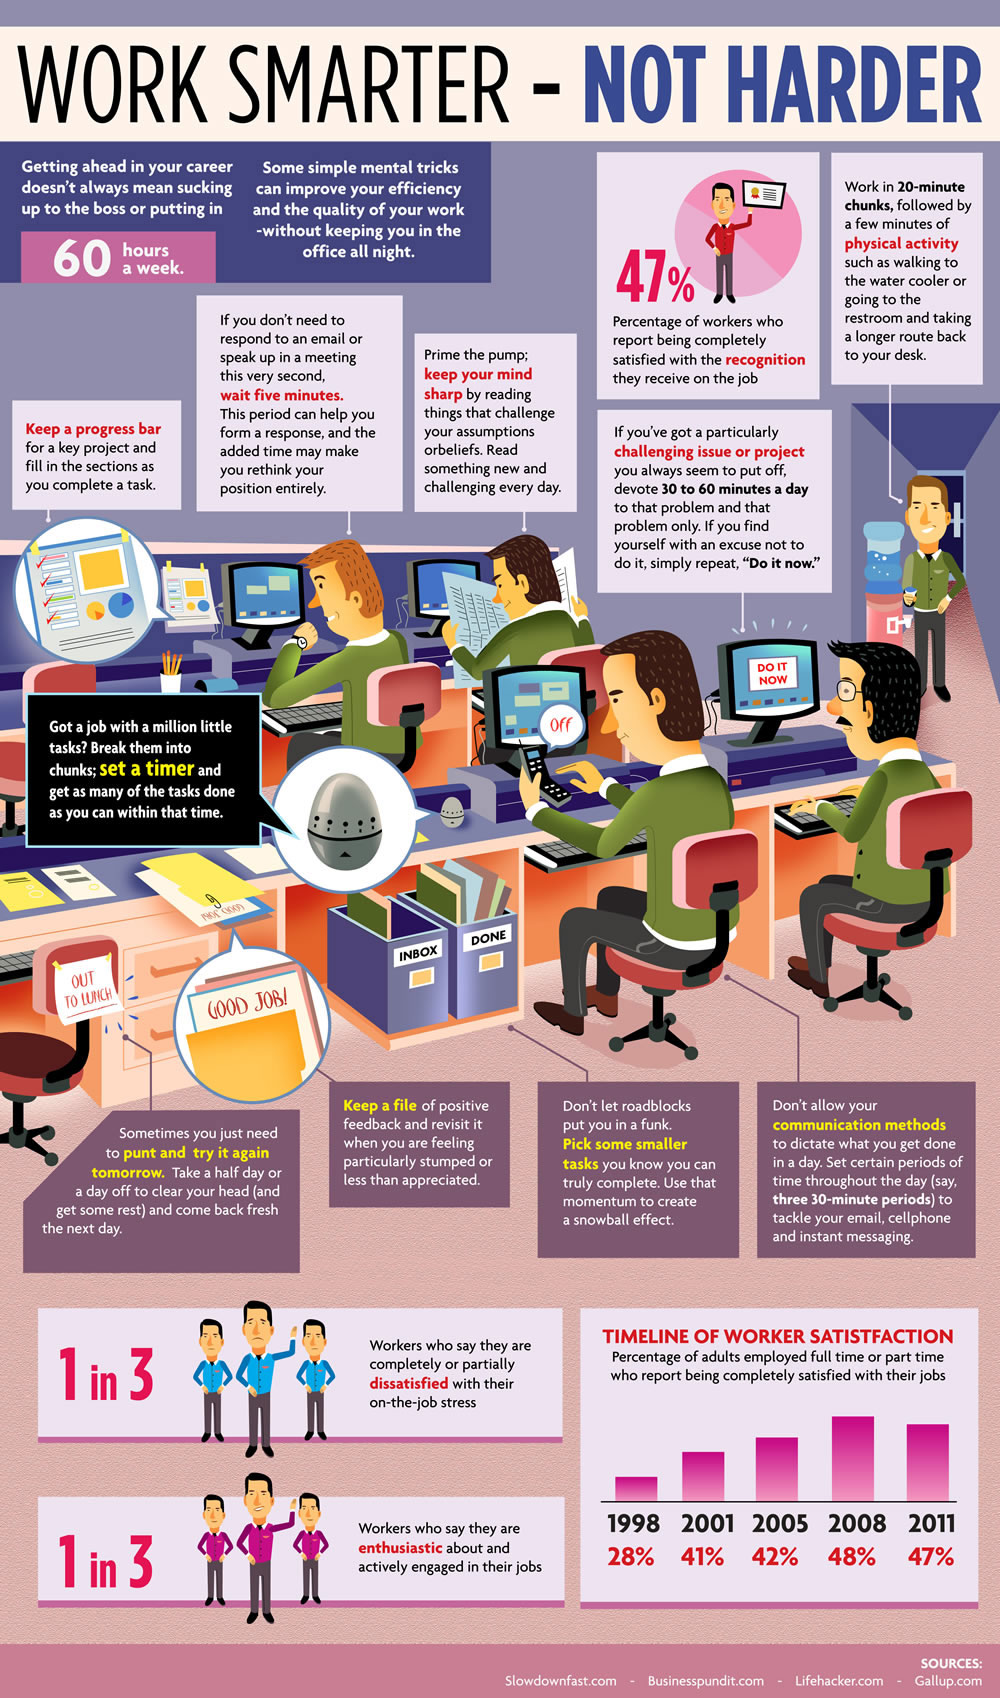 Work Smarter: Maximize Your Efficiency In The Office [Infographic]